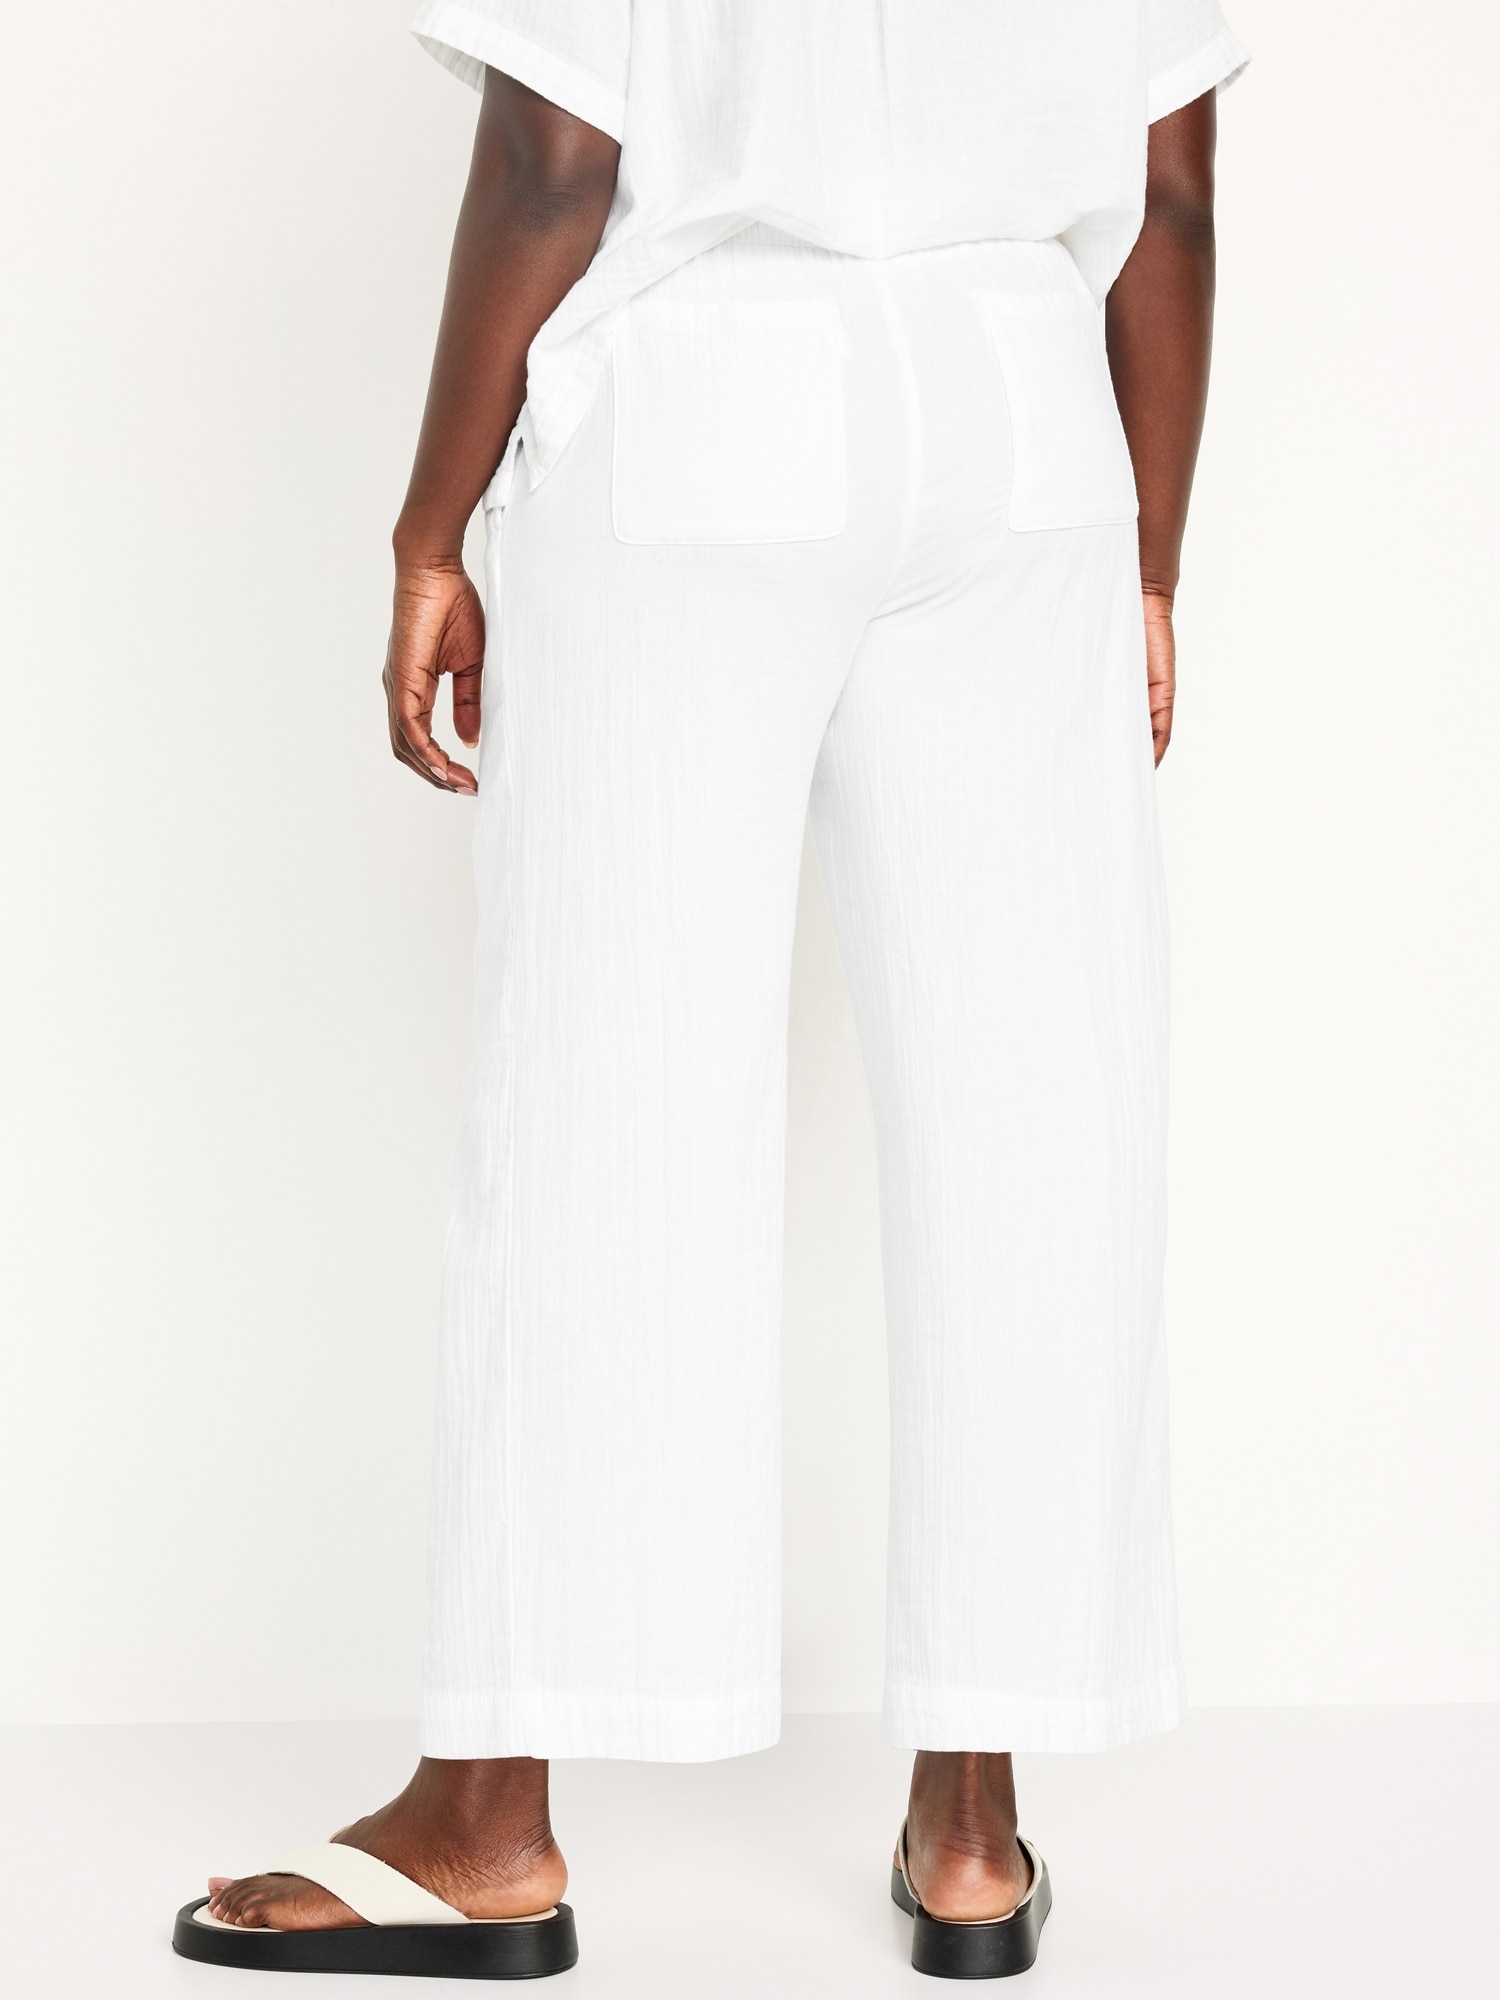 High-Waisted Crinkle Gauze Pull-On Ankle Pants for Women | Old Navy